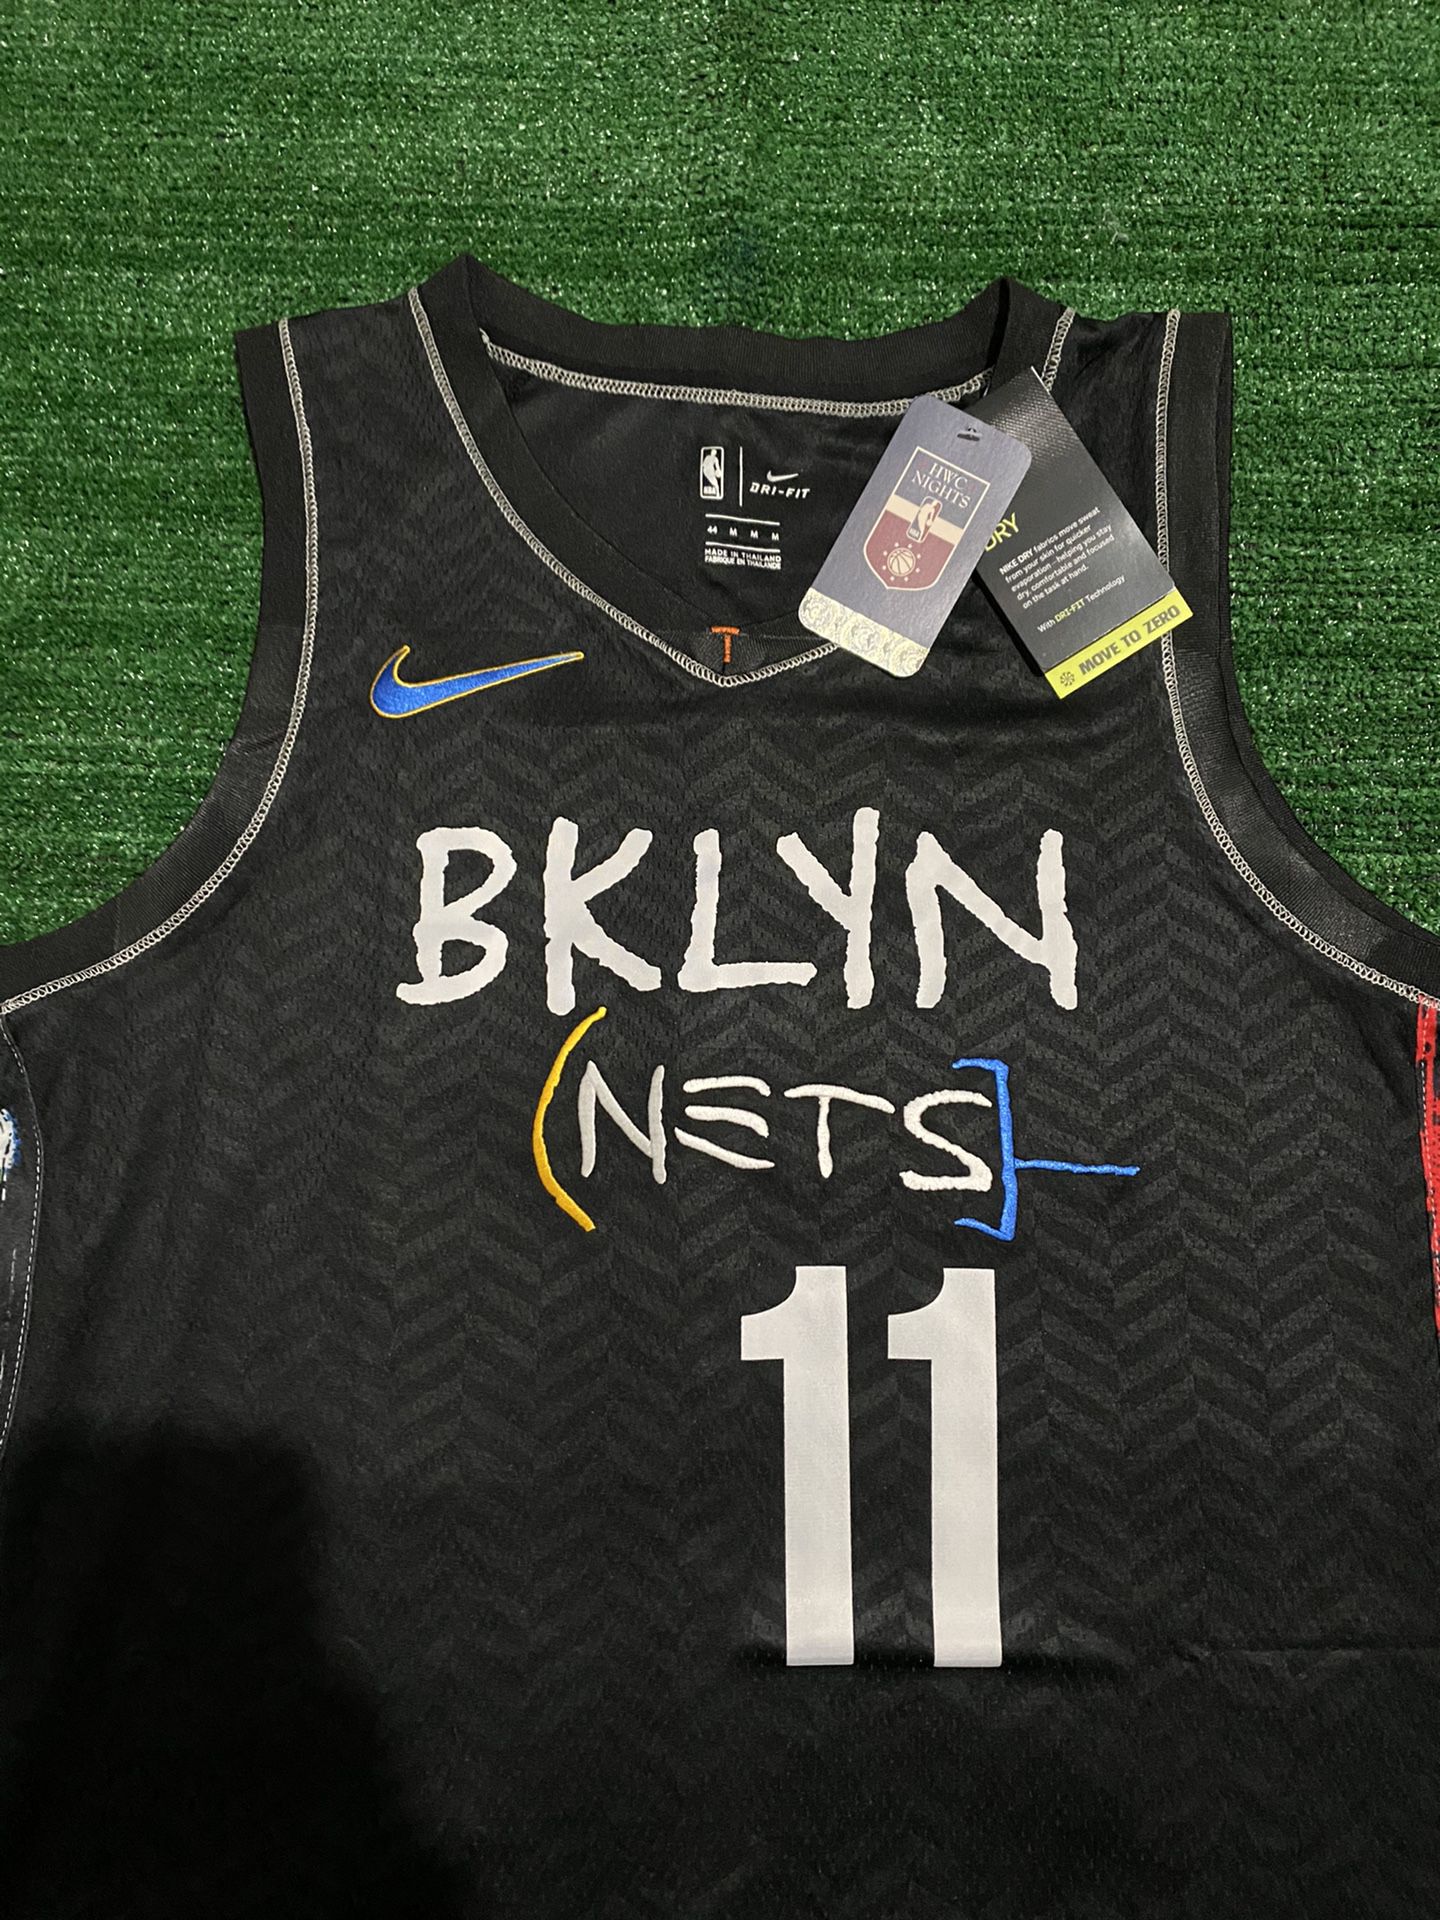 Kyrie Irving Brooklyn Nets Player-Issued #11 Black Jersey from the